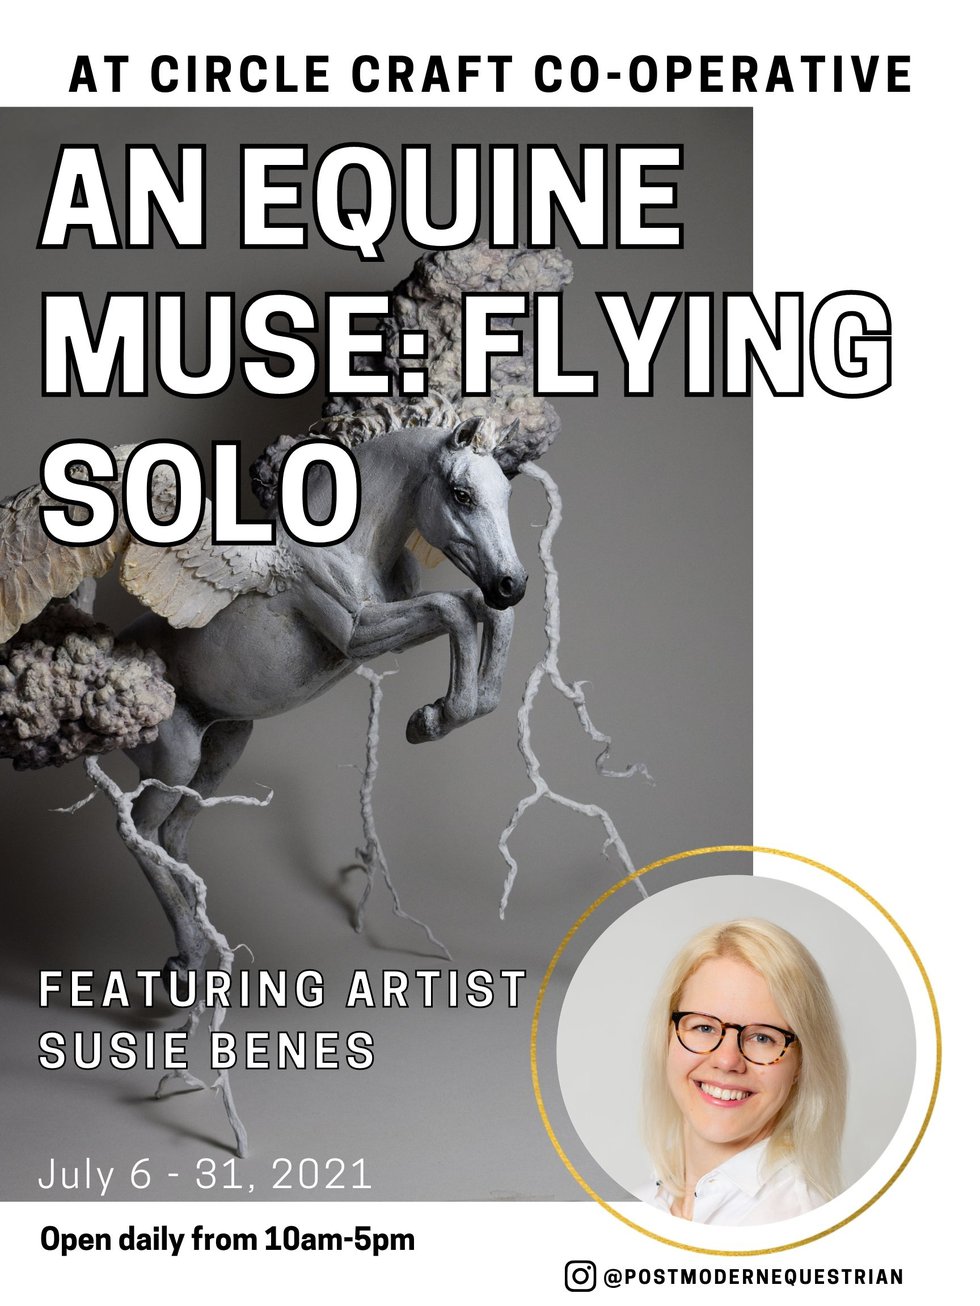 Susie Benes, "Dancing with Thunder," 2021